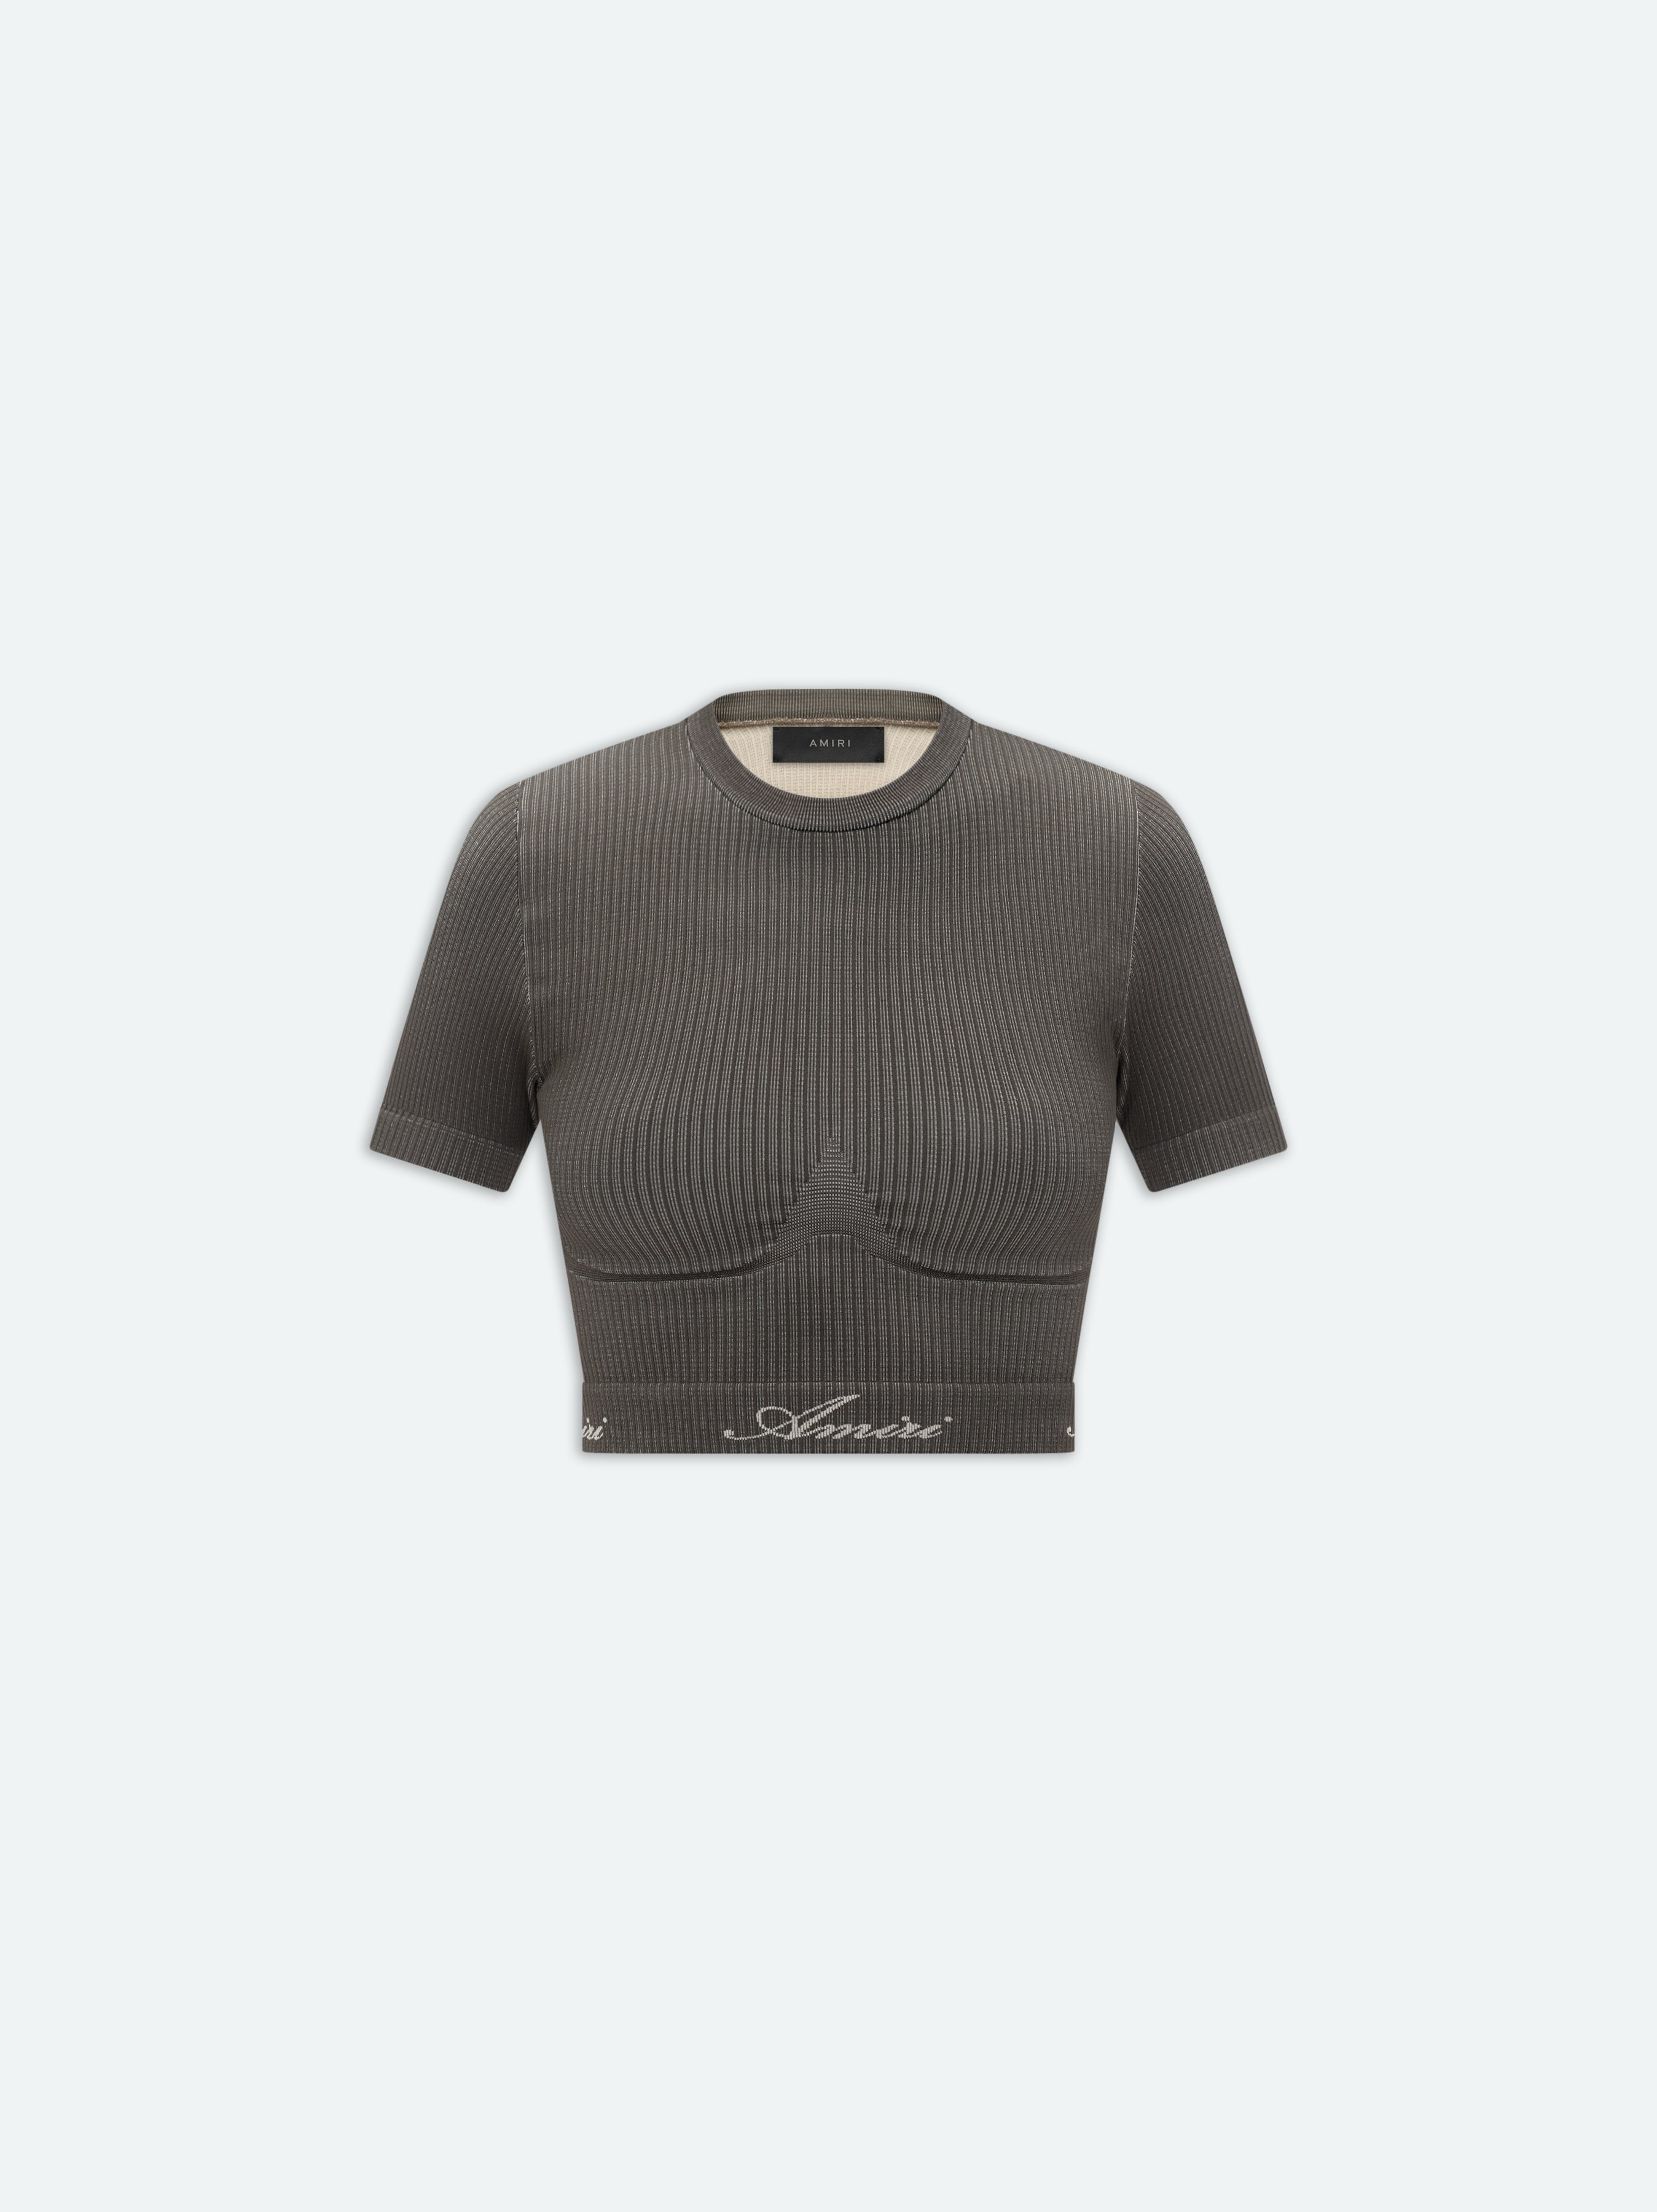 Product WOMEN - RIBBED SEAMLESS S/S TOP - Brown featured image